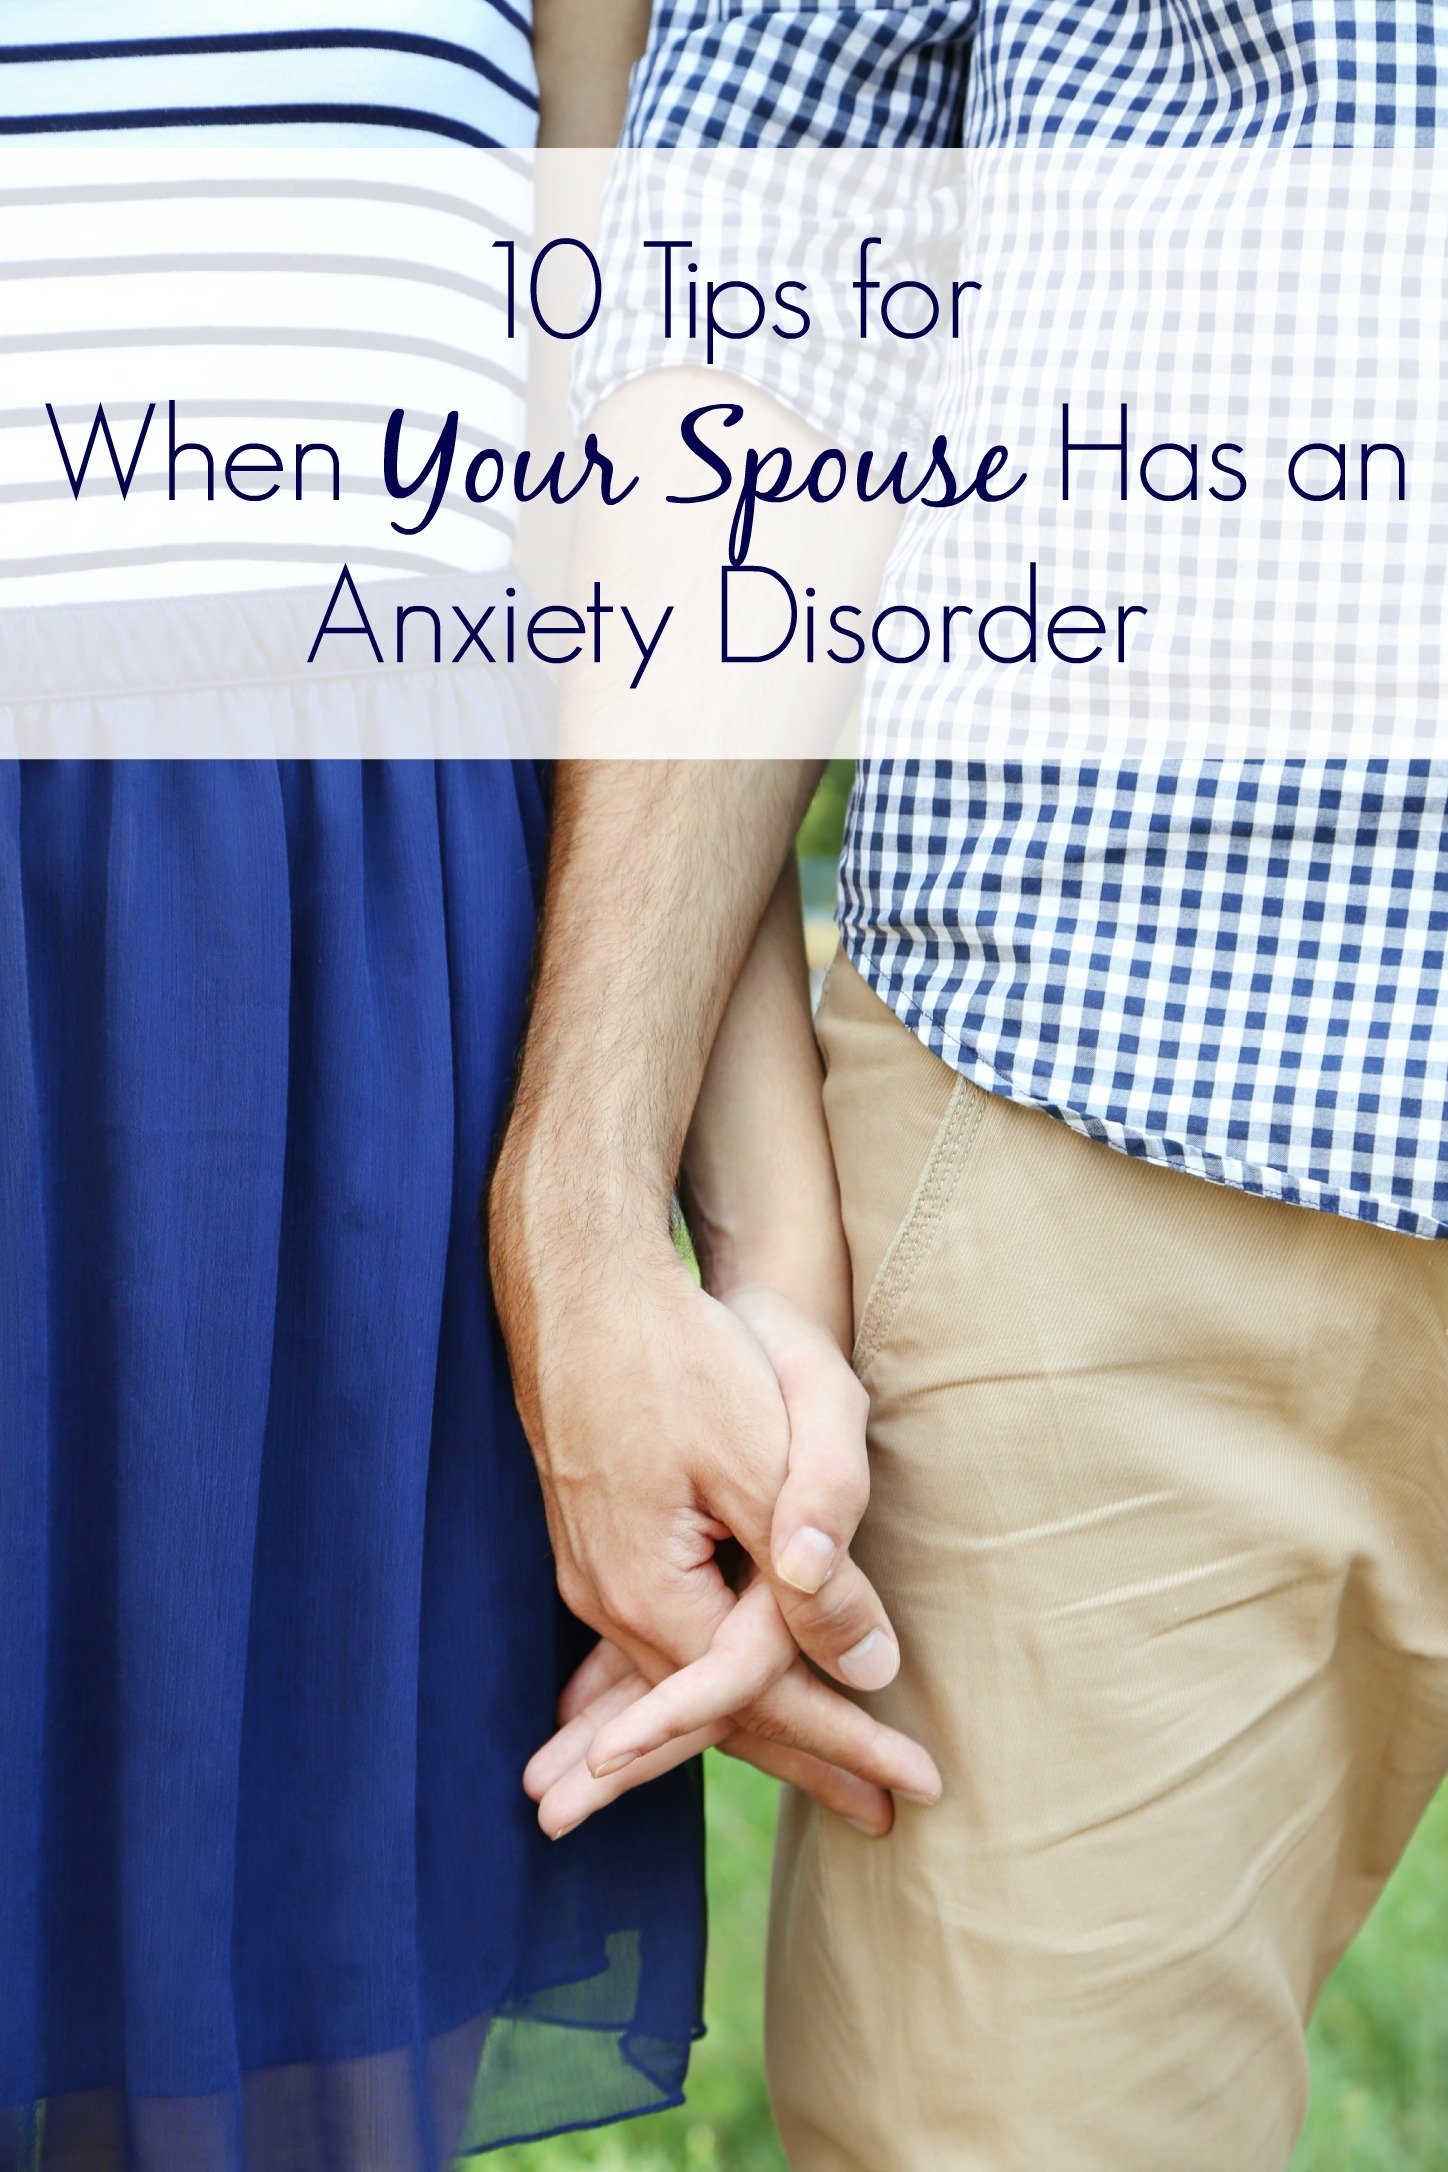 10 Tips for When Your Spouse Has an Anxiety Disorder